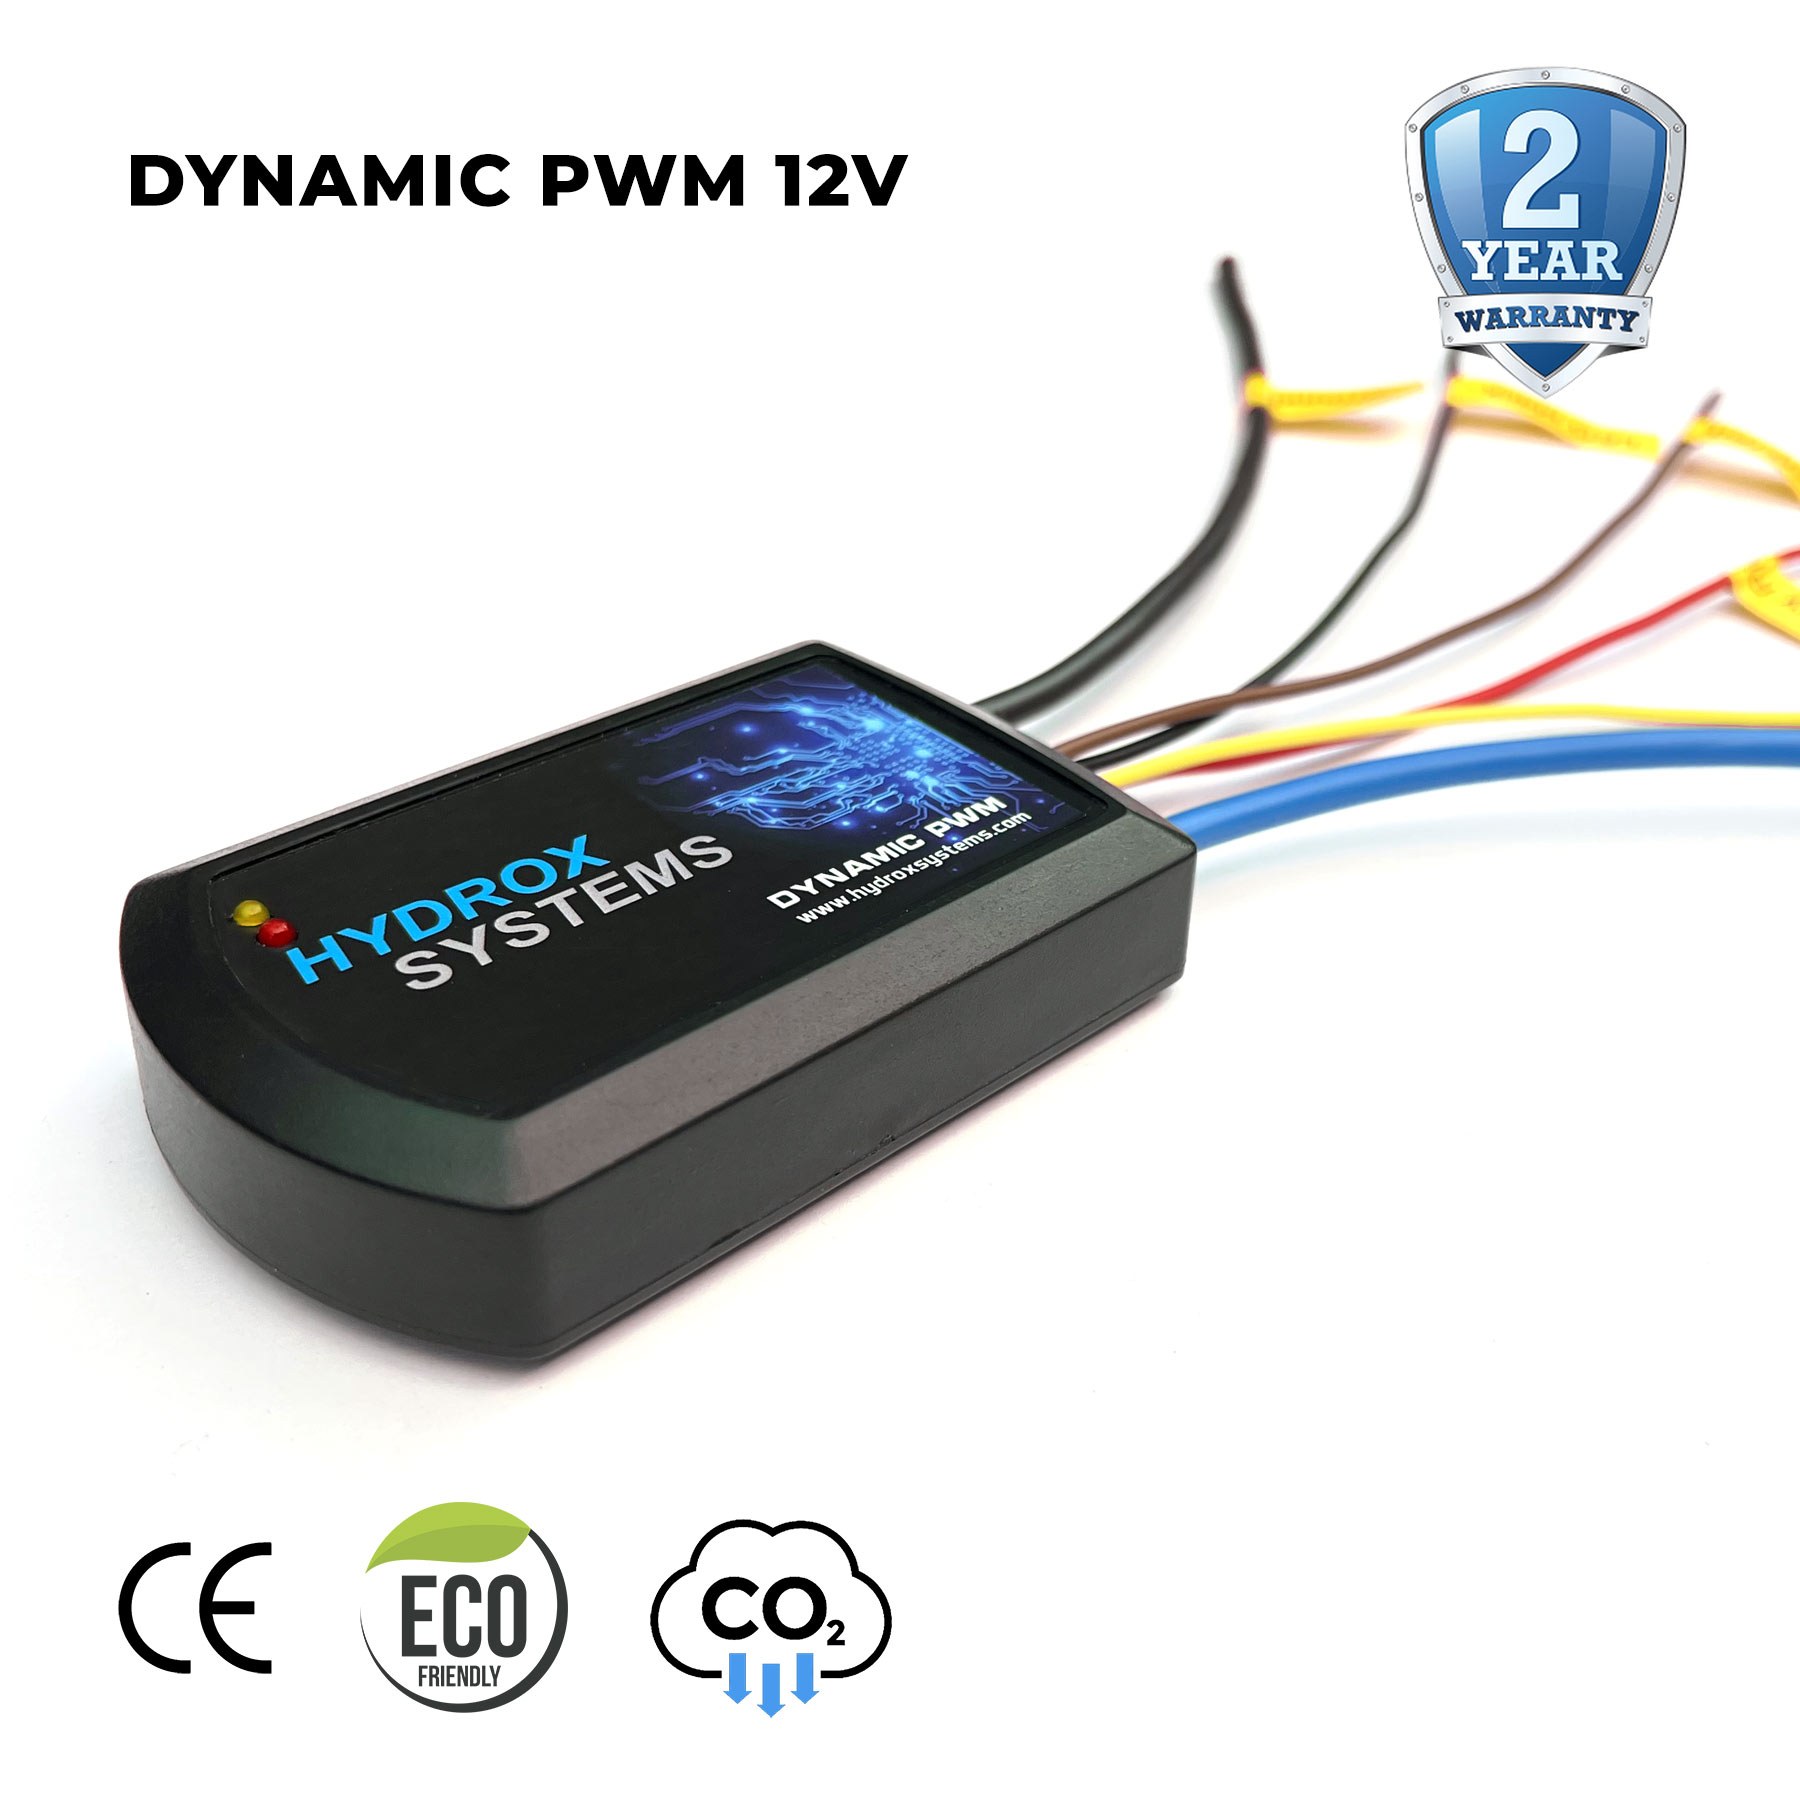 Dynamic PWM for Diesel 12V - Total automation for your HHO Kit